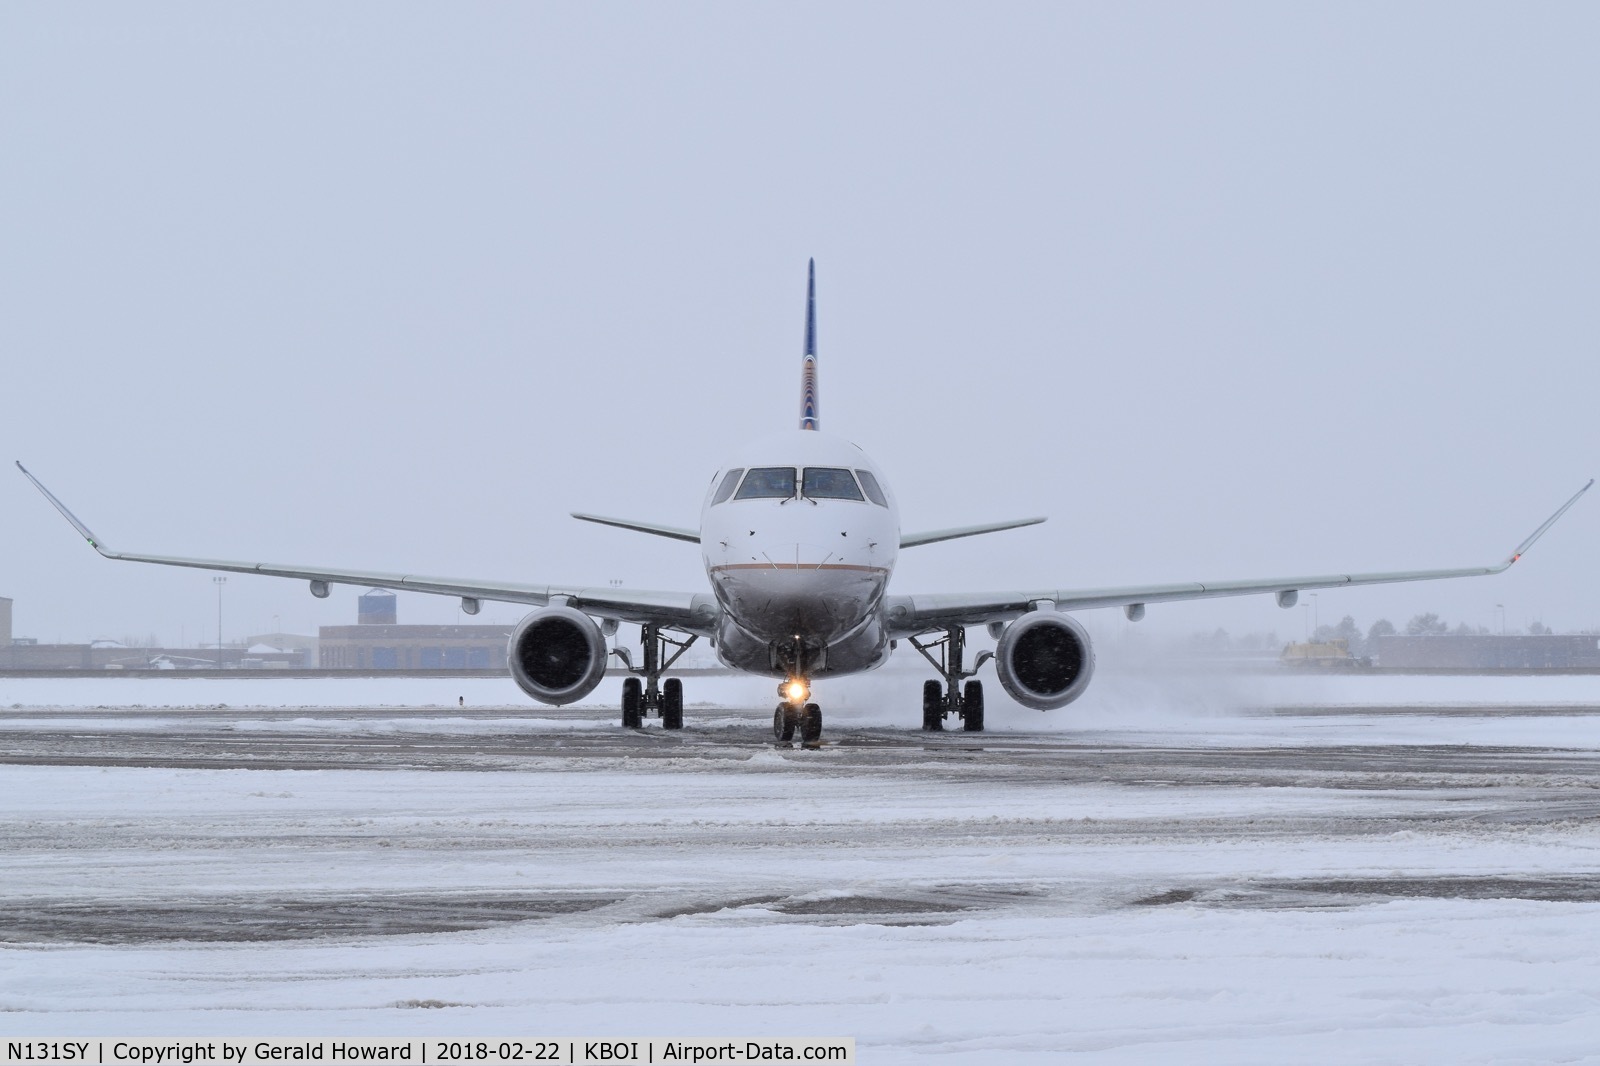 N131SY, 2015 Embraer 175LR (ERJ-170-200LR) C/N 17000450, Getting ready to turn onto the remote spots for de icing.